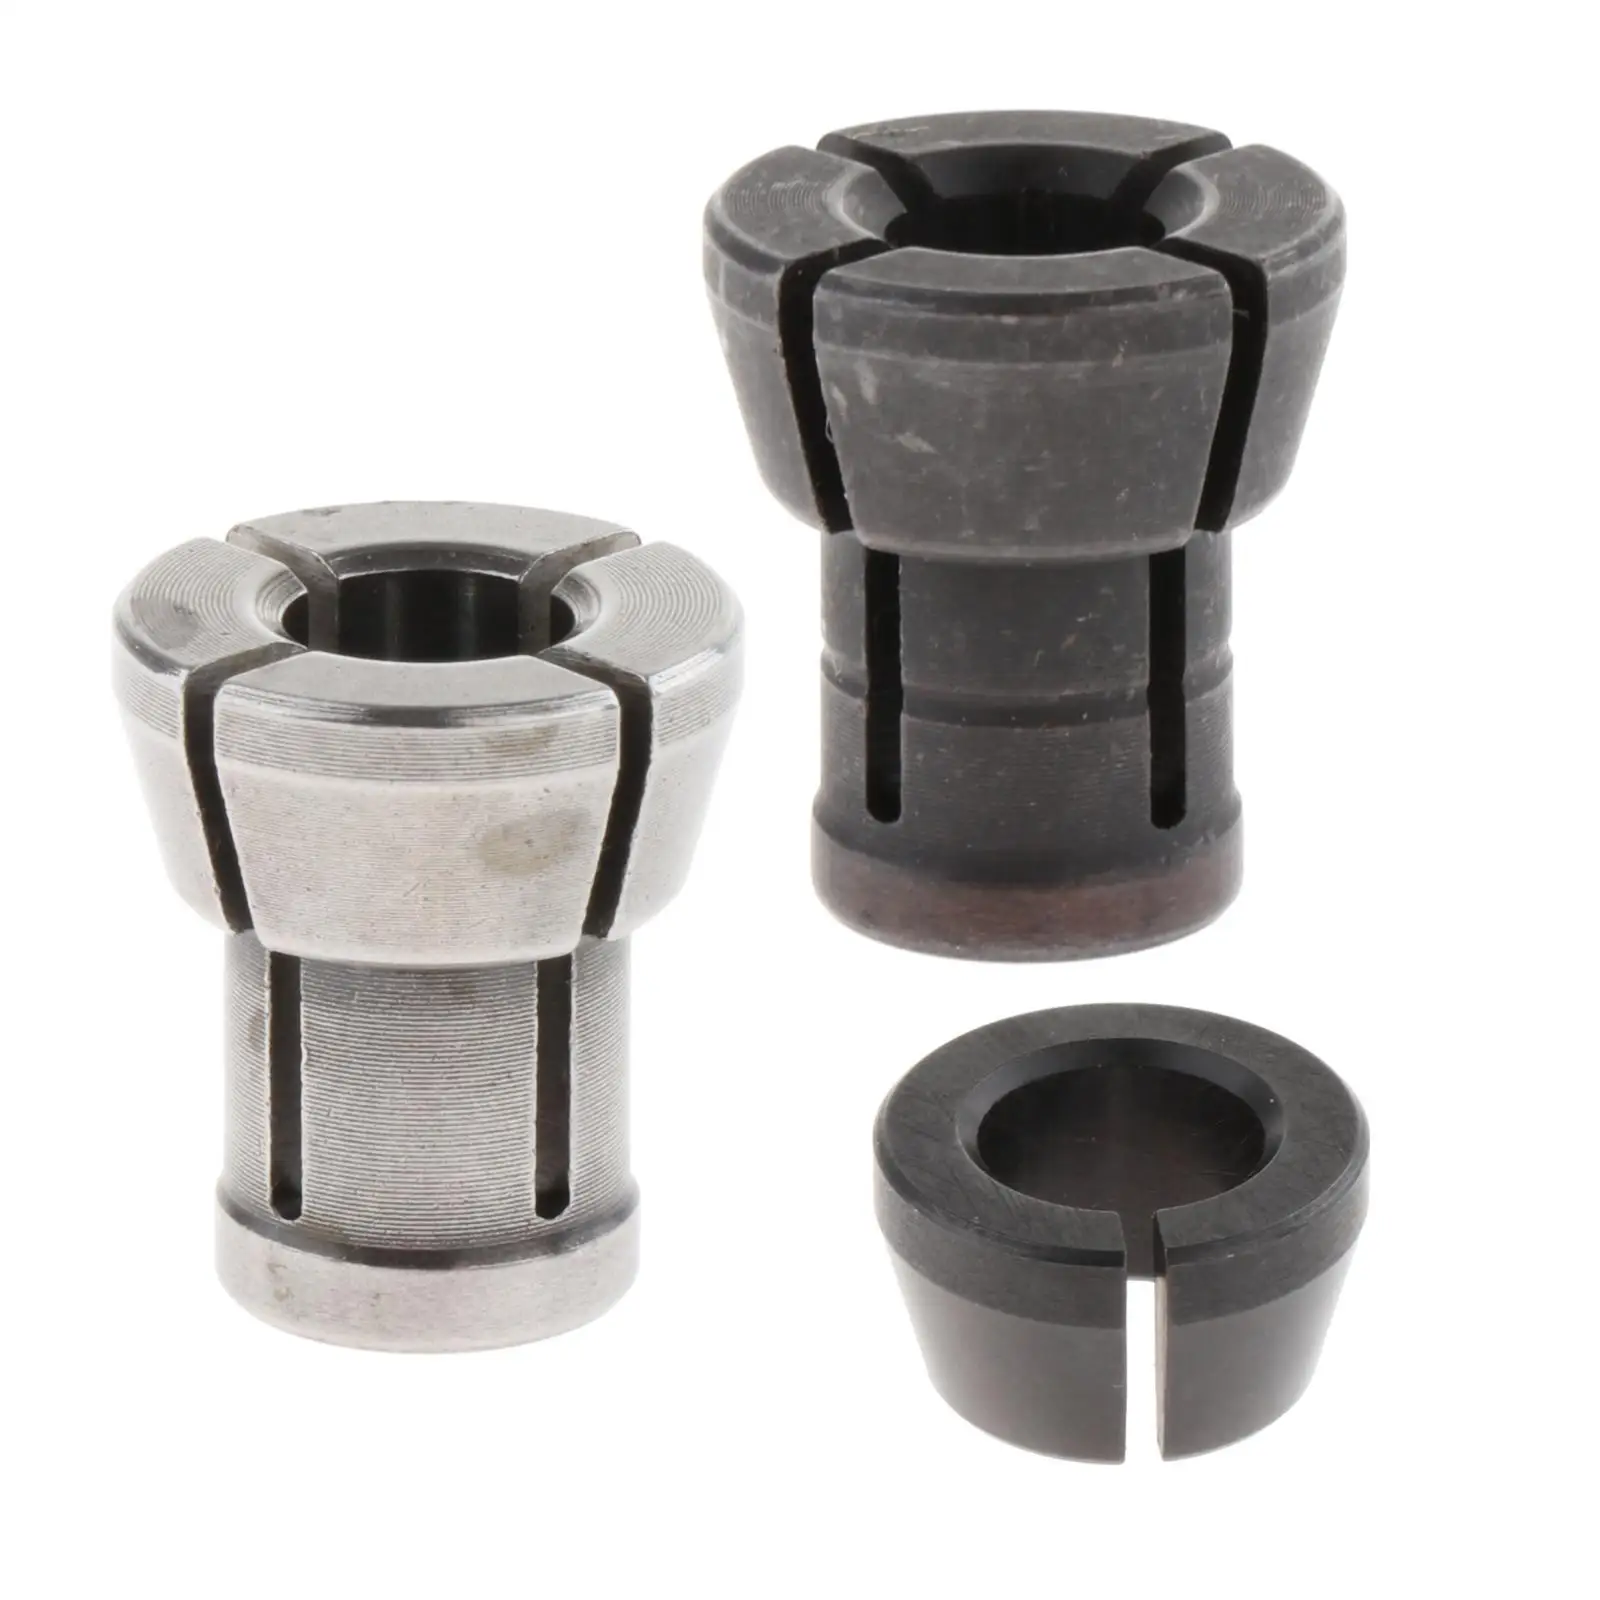 Carbon Steel High Precision Adapter Collet Replacement Collet Chuck for Engraving Trimming Machine Accessories Parts